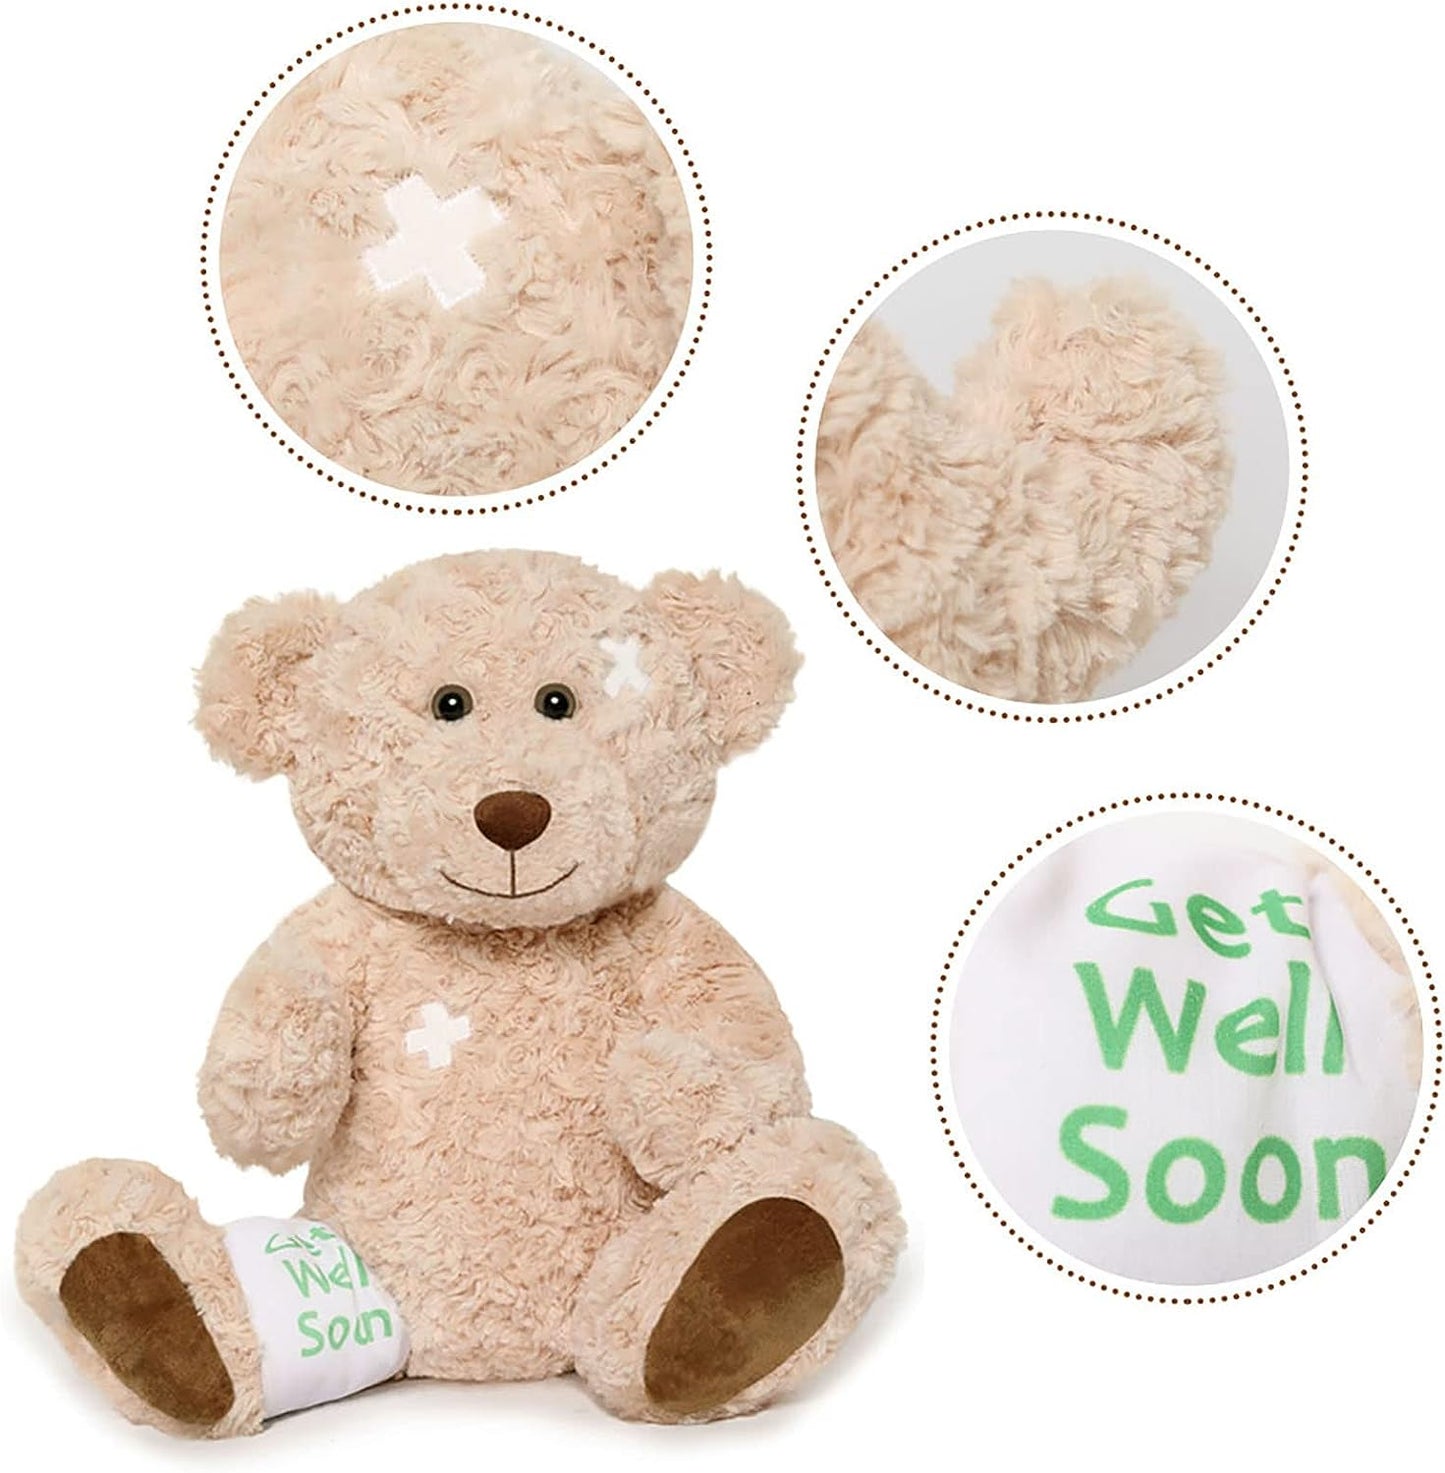 Get Well Soon Teddy Bear, Brown, 13.8 Inches